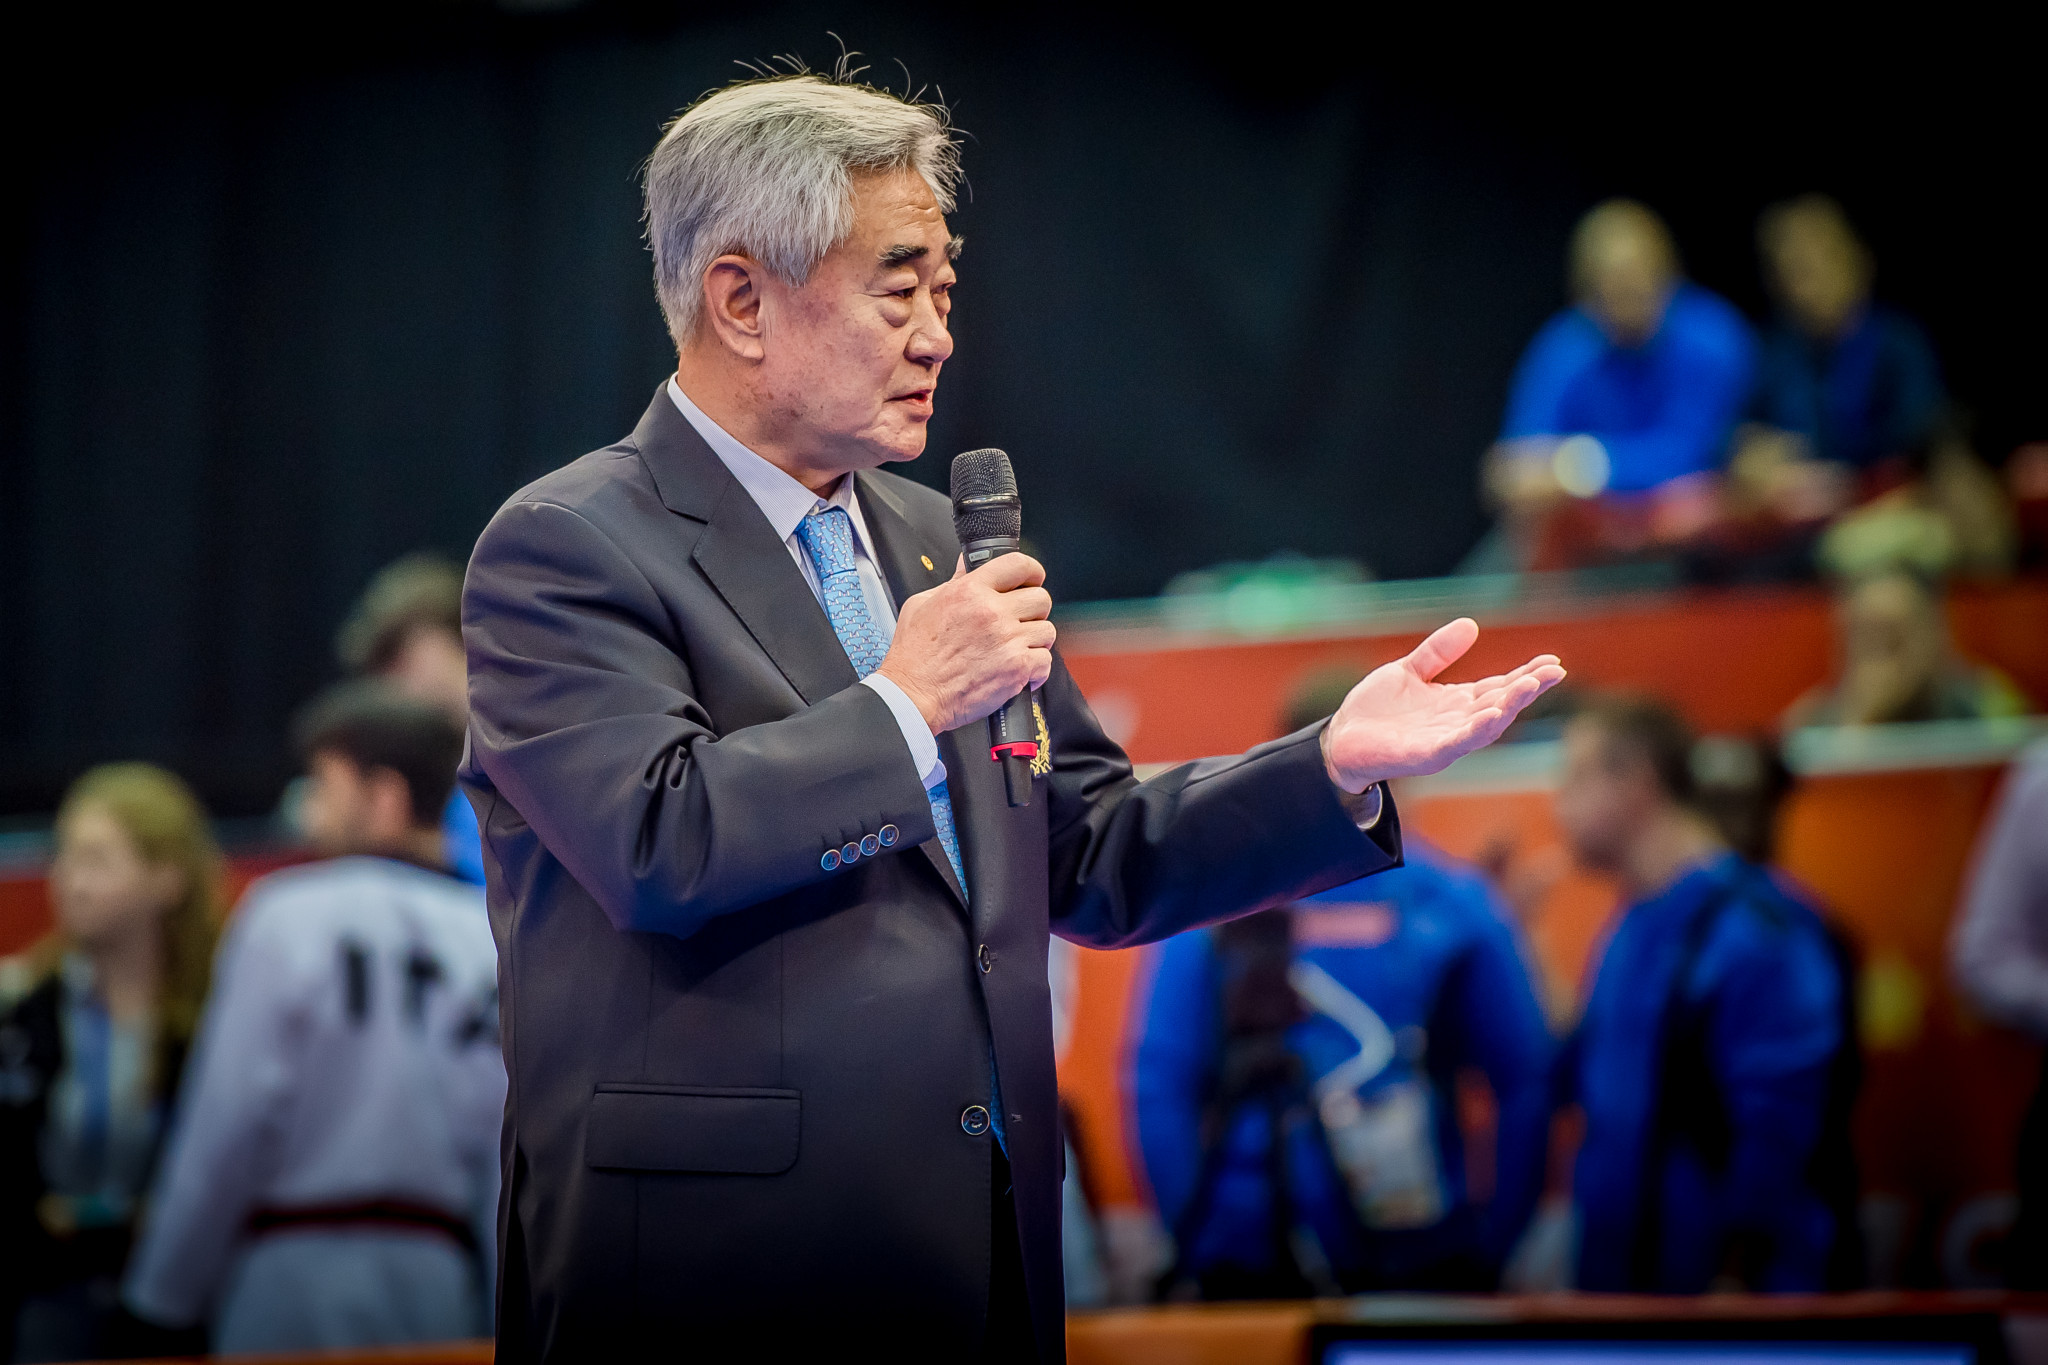 World Taekwondo President Chungwon Choue has expressed his confidence that London will deliver a "very successful" Grand Prix ©World Taekwondo